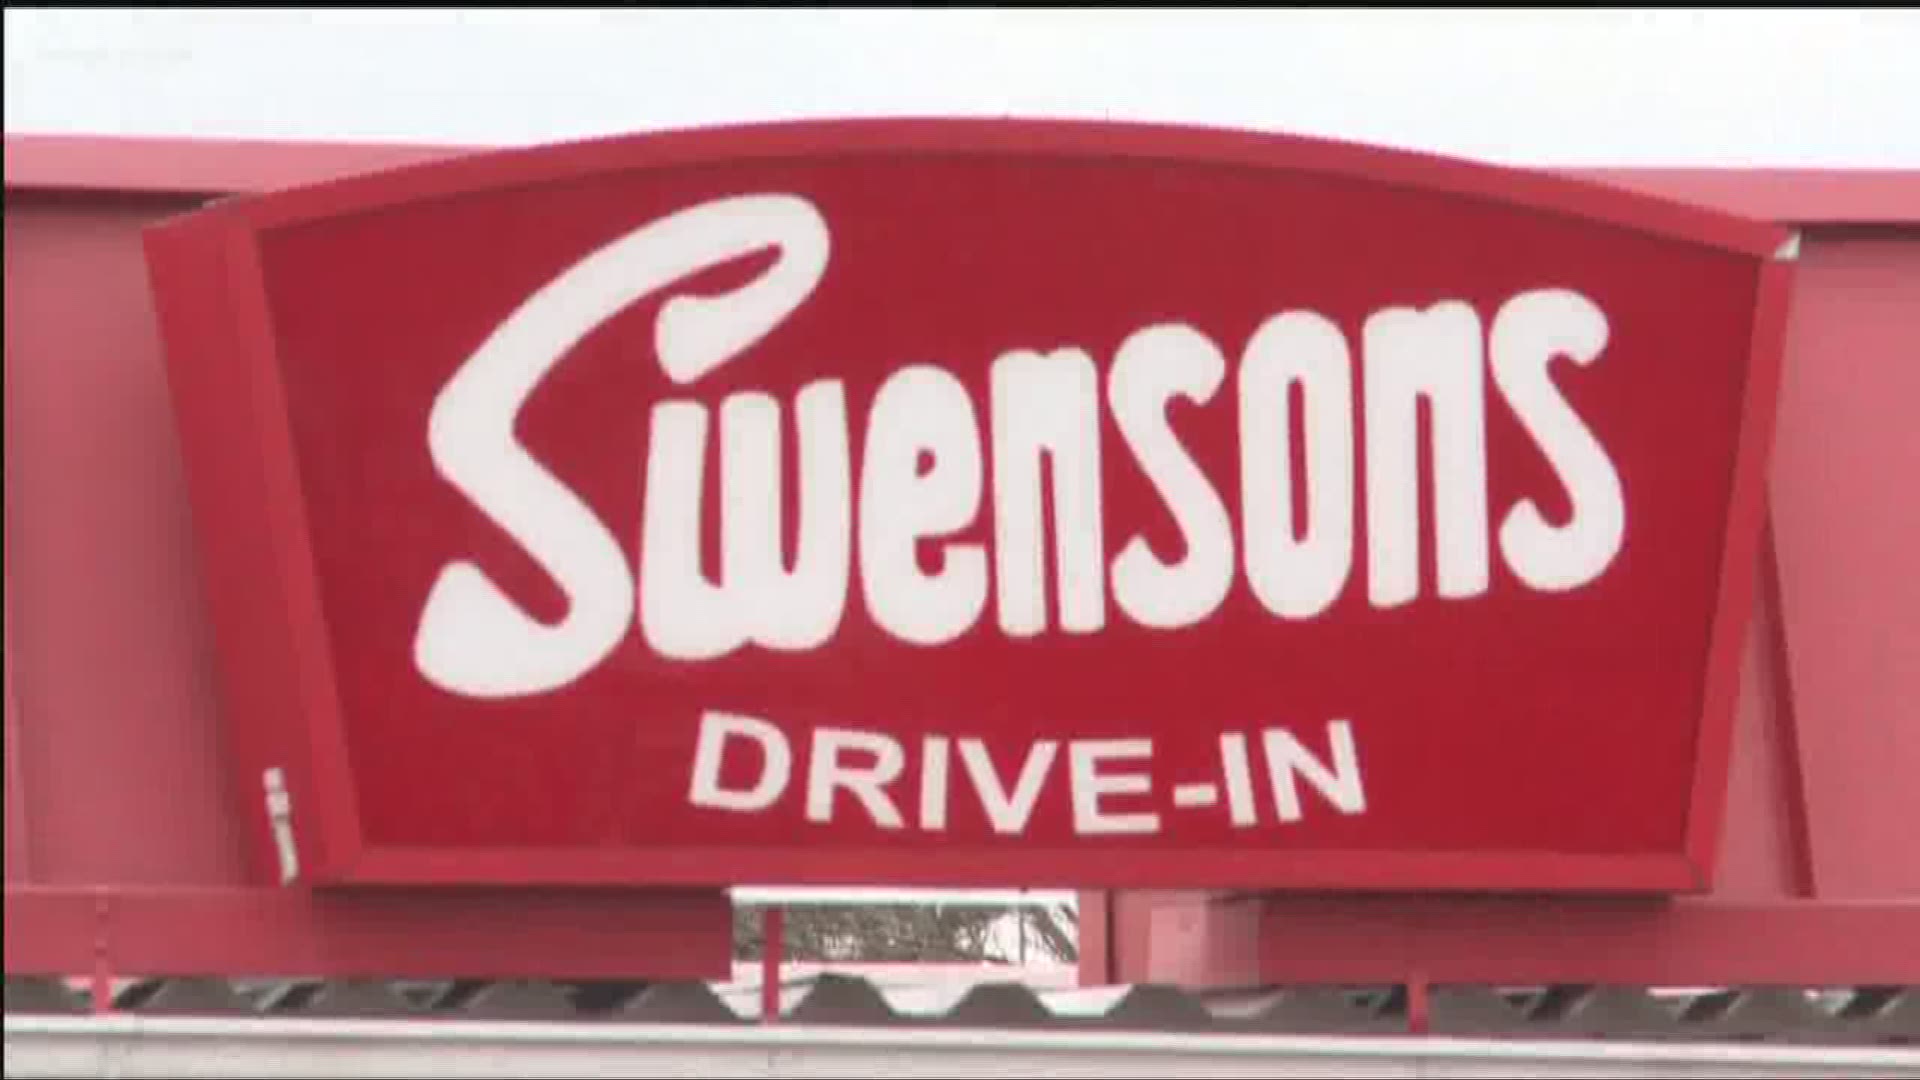 Aug. 5, 2019: Happy birthday, Swensons! The iconic burger joint is celebrating its 85th anniversary all week long. From Monday (Aug. 5) until Sunday (Aug. 11), the drive-in restaurants will be giving away $10 worth of gift coins to every 85th car at any of its locations. To be eligible, the driver must make a purchase, and the $10 gift coins can be used for any future purchase.